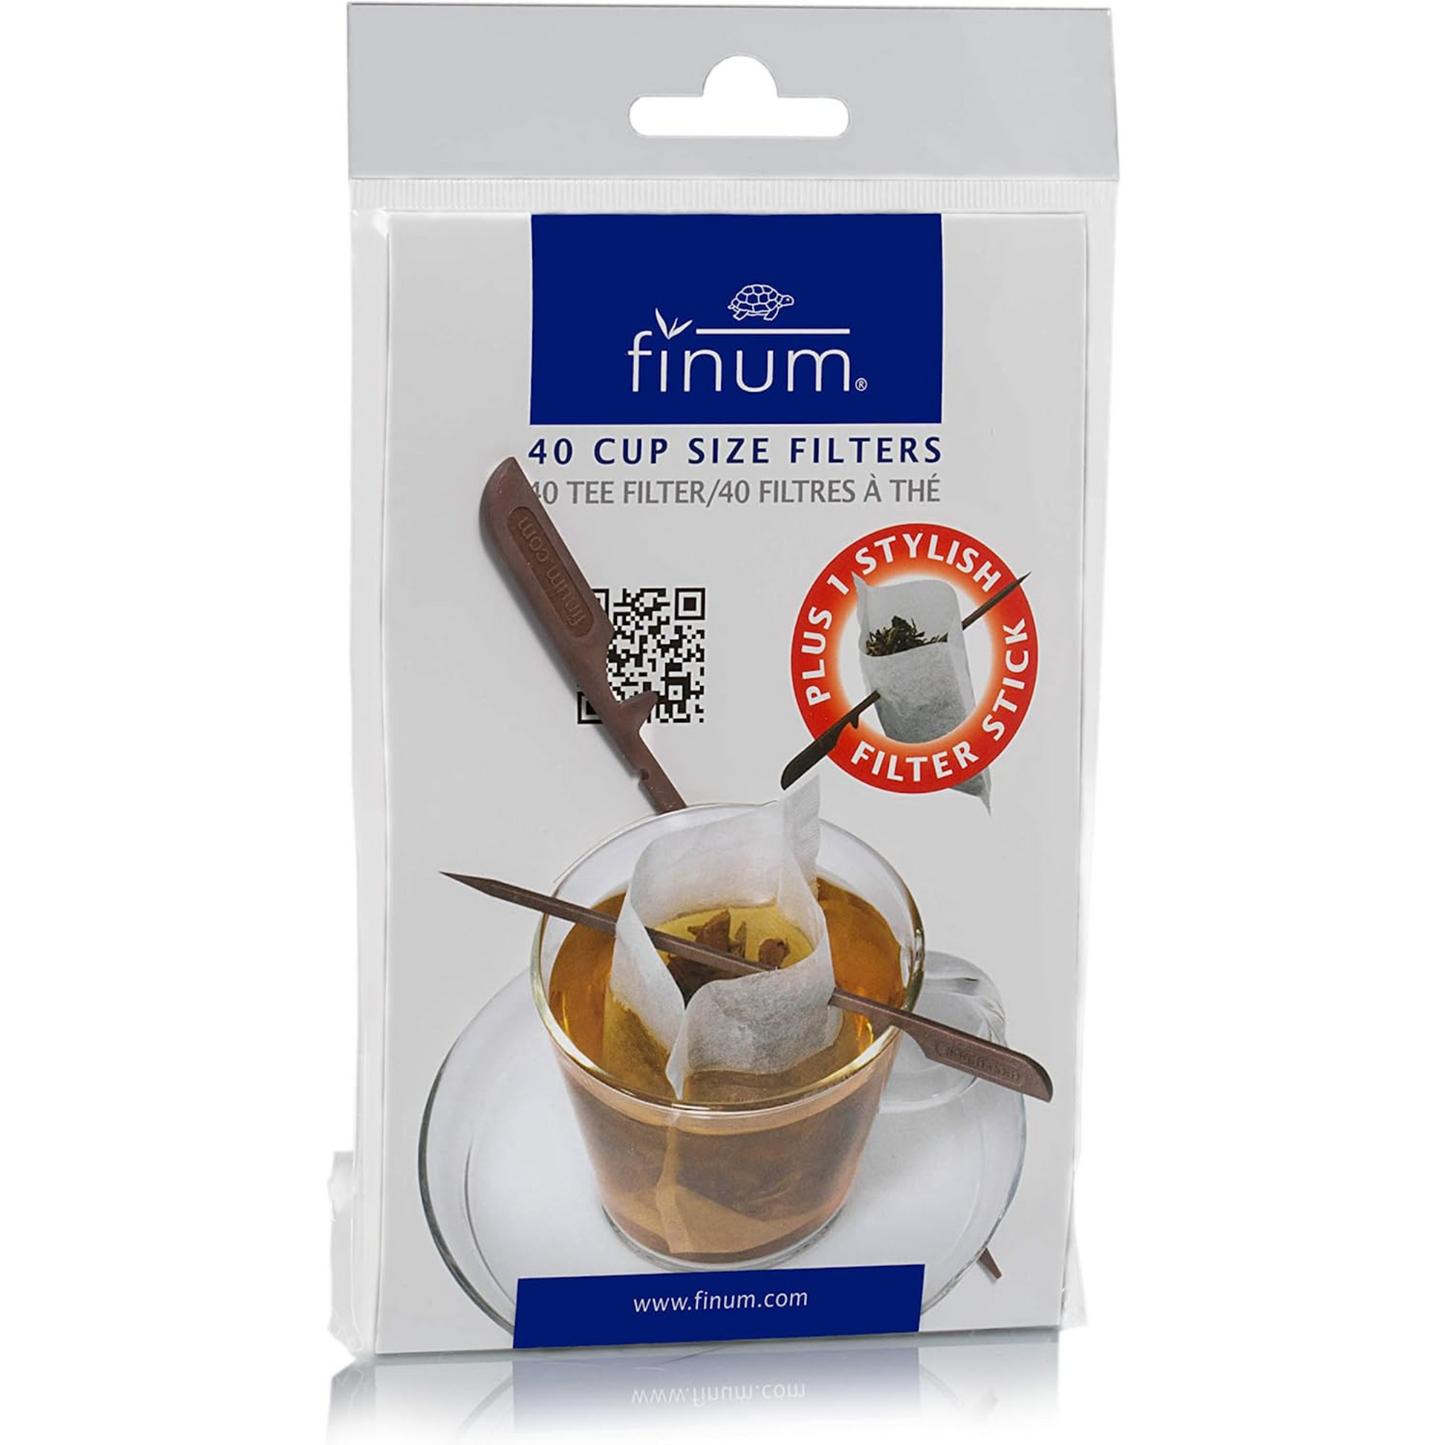 Primary Image of Finum Large Paper Tea Filters (40 count)